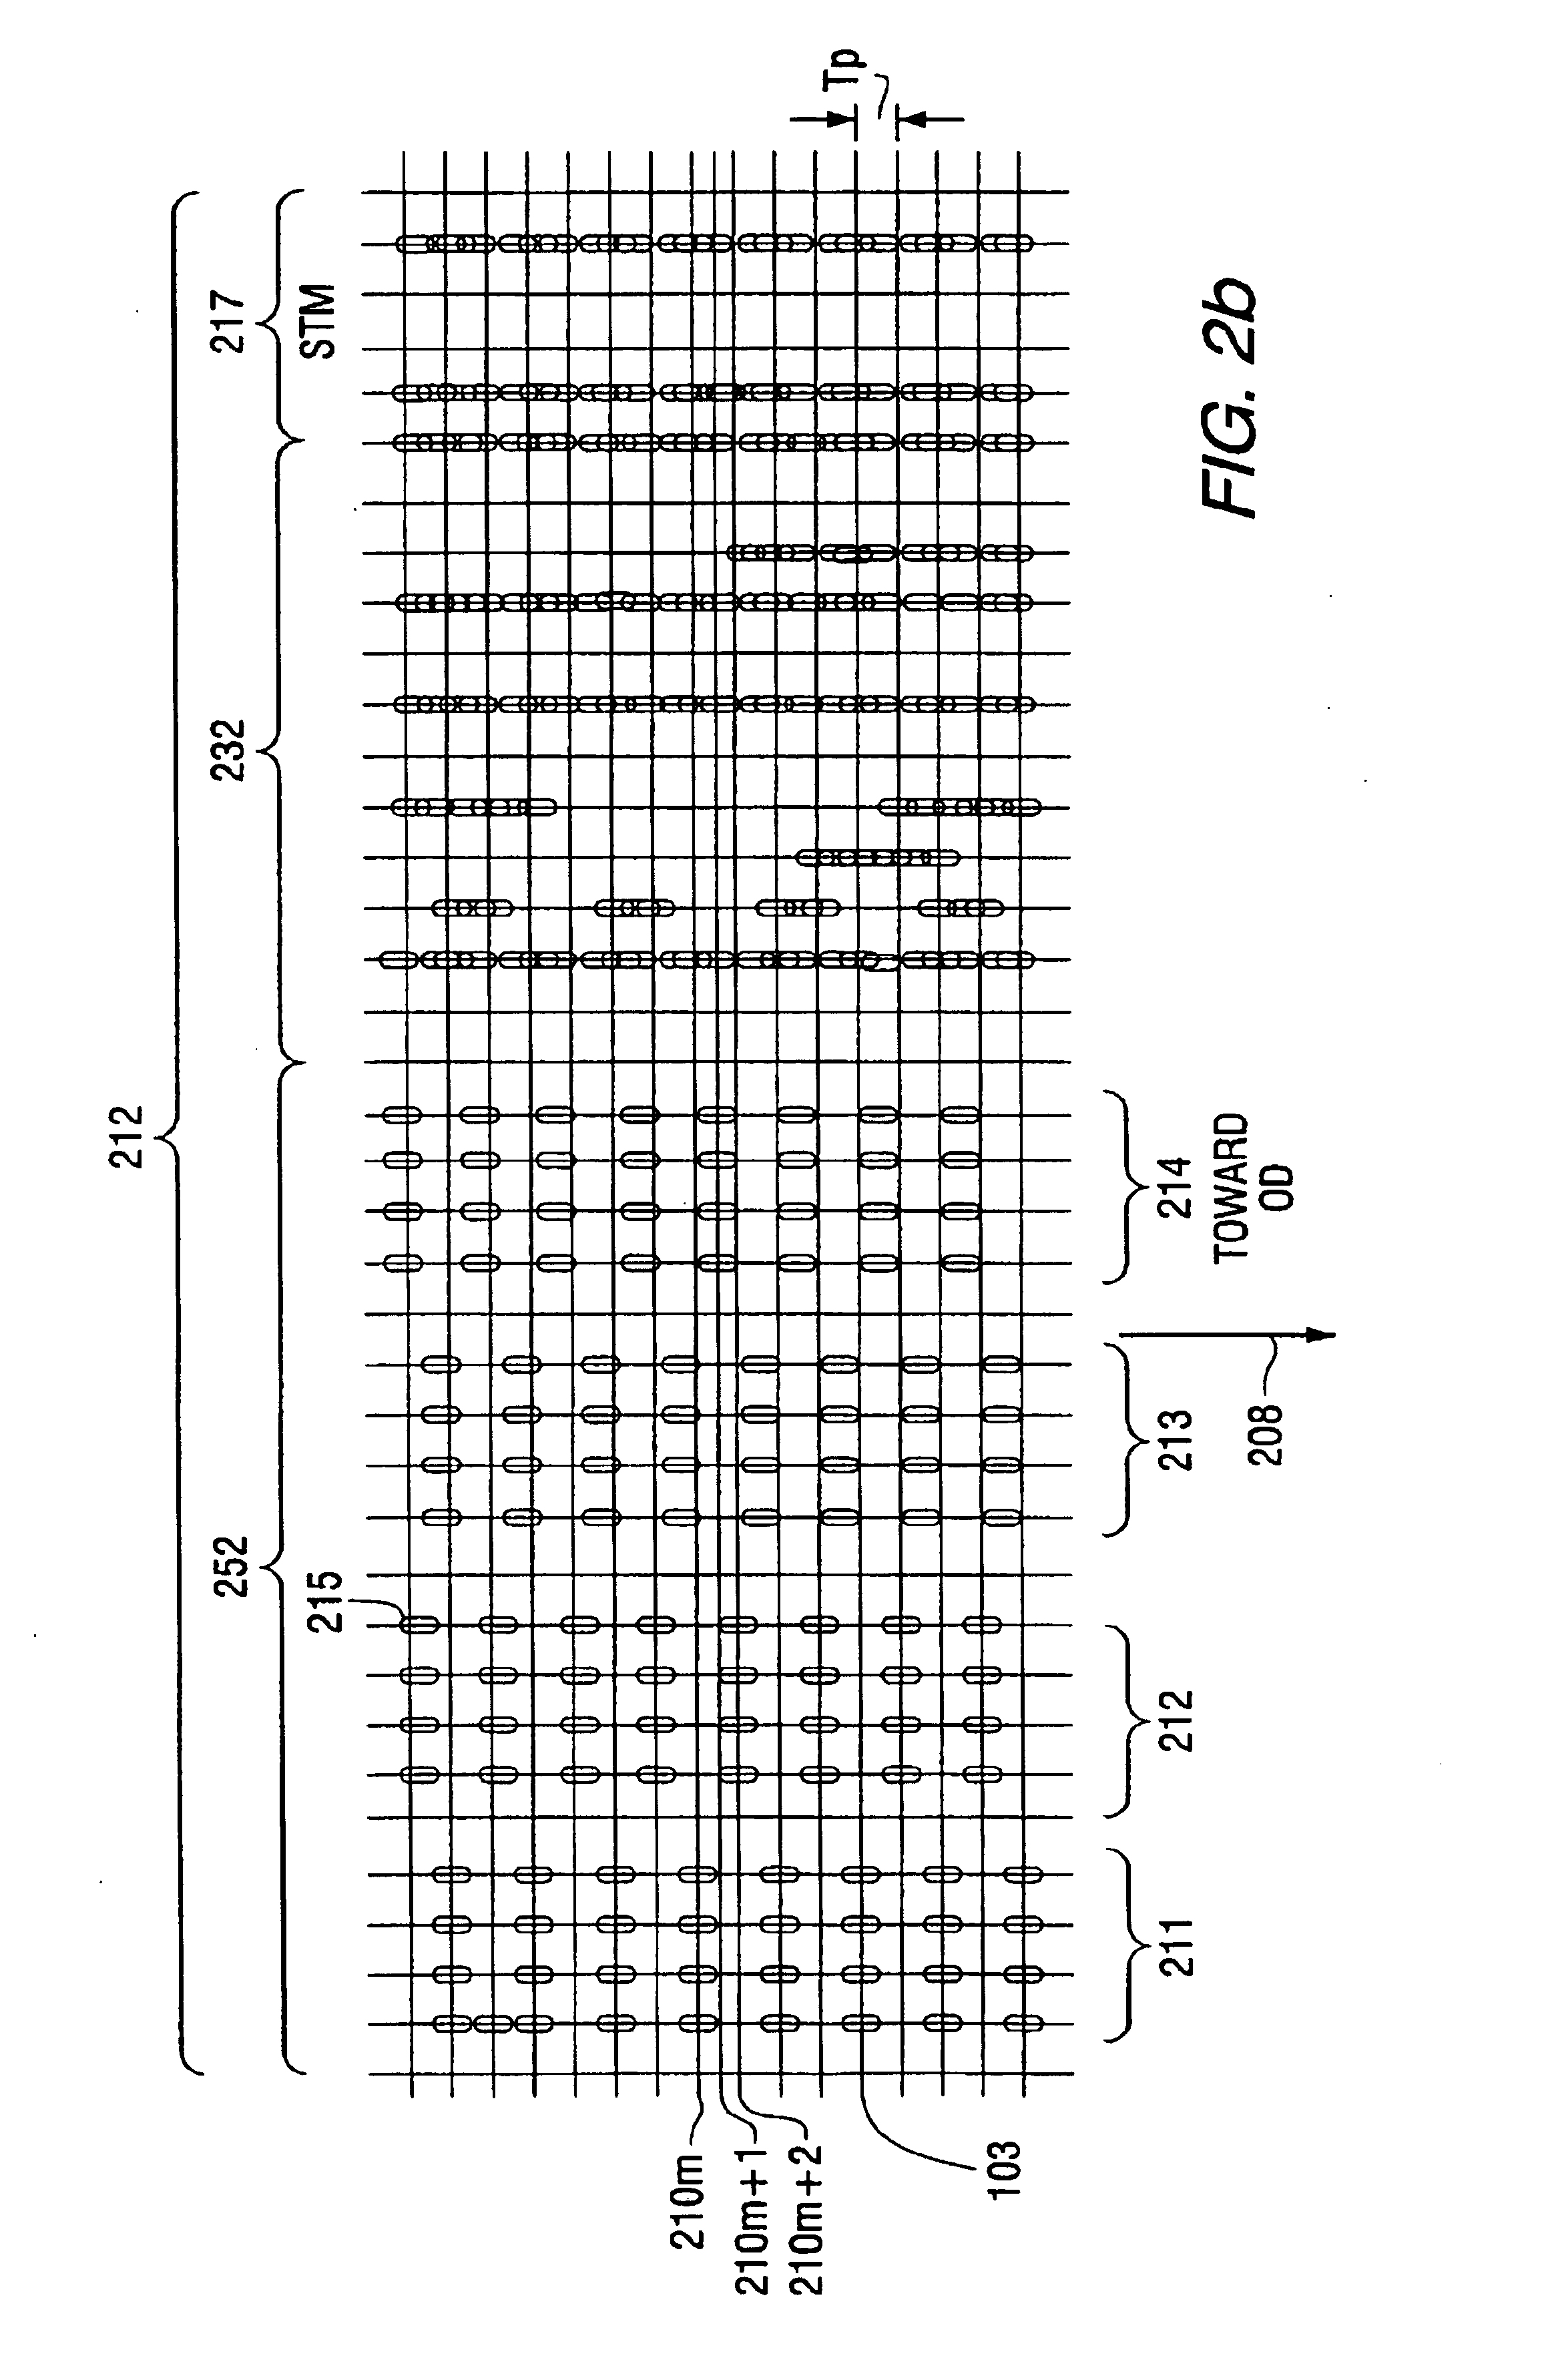 Laser assisted track width definition and radial control with magnetic recording